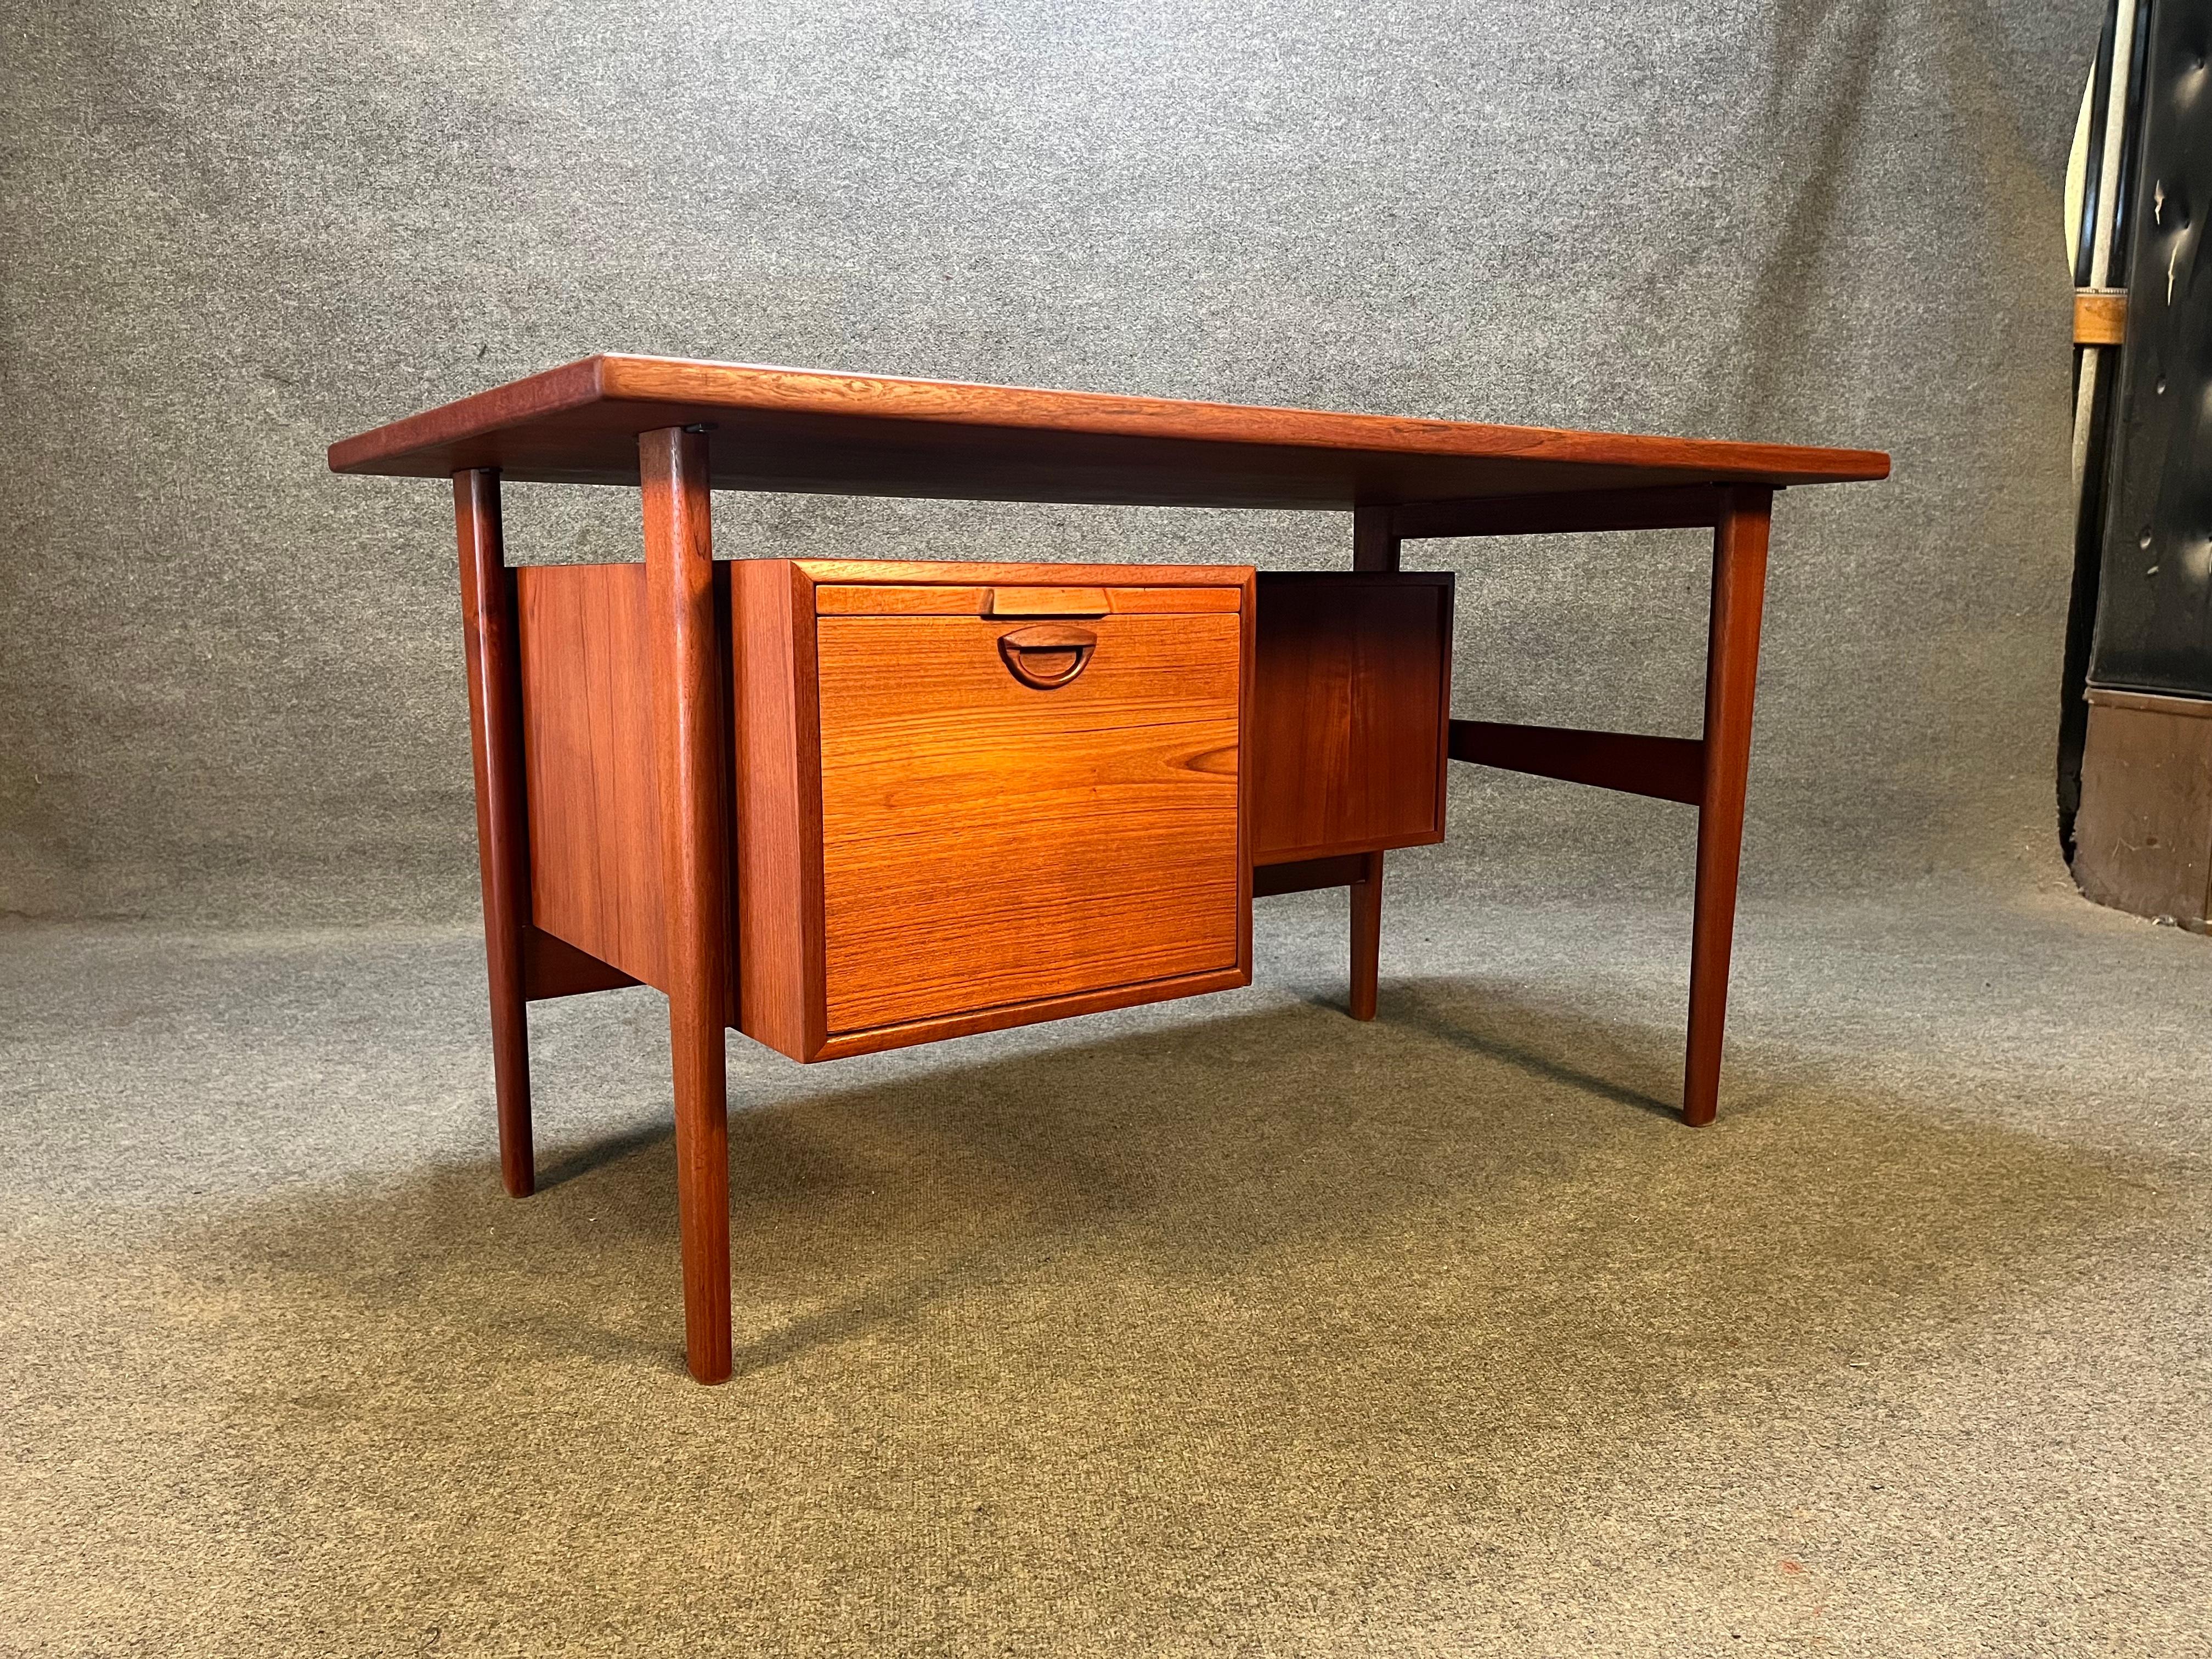 Here is an extremely rare desk by Kai Kristiansen for FM Mobler Denmark. This is a smaller version of his famous FM60 desk. Desk features 1 large drawer on the left side with a pullout writing table. Desk also features a finished back with two open